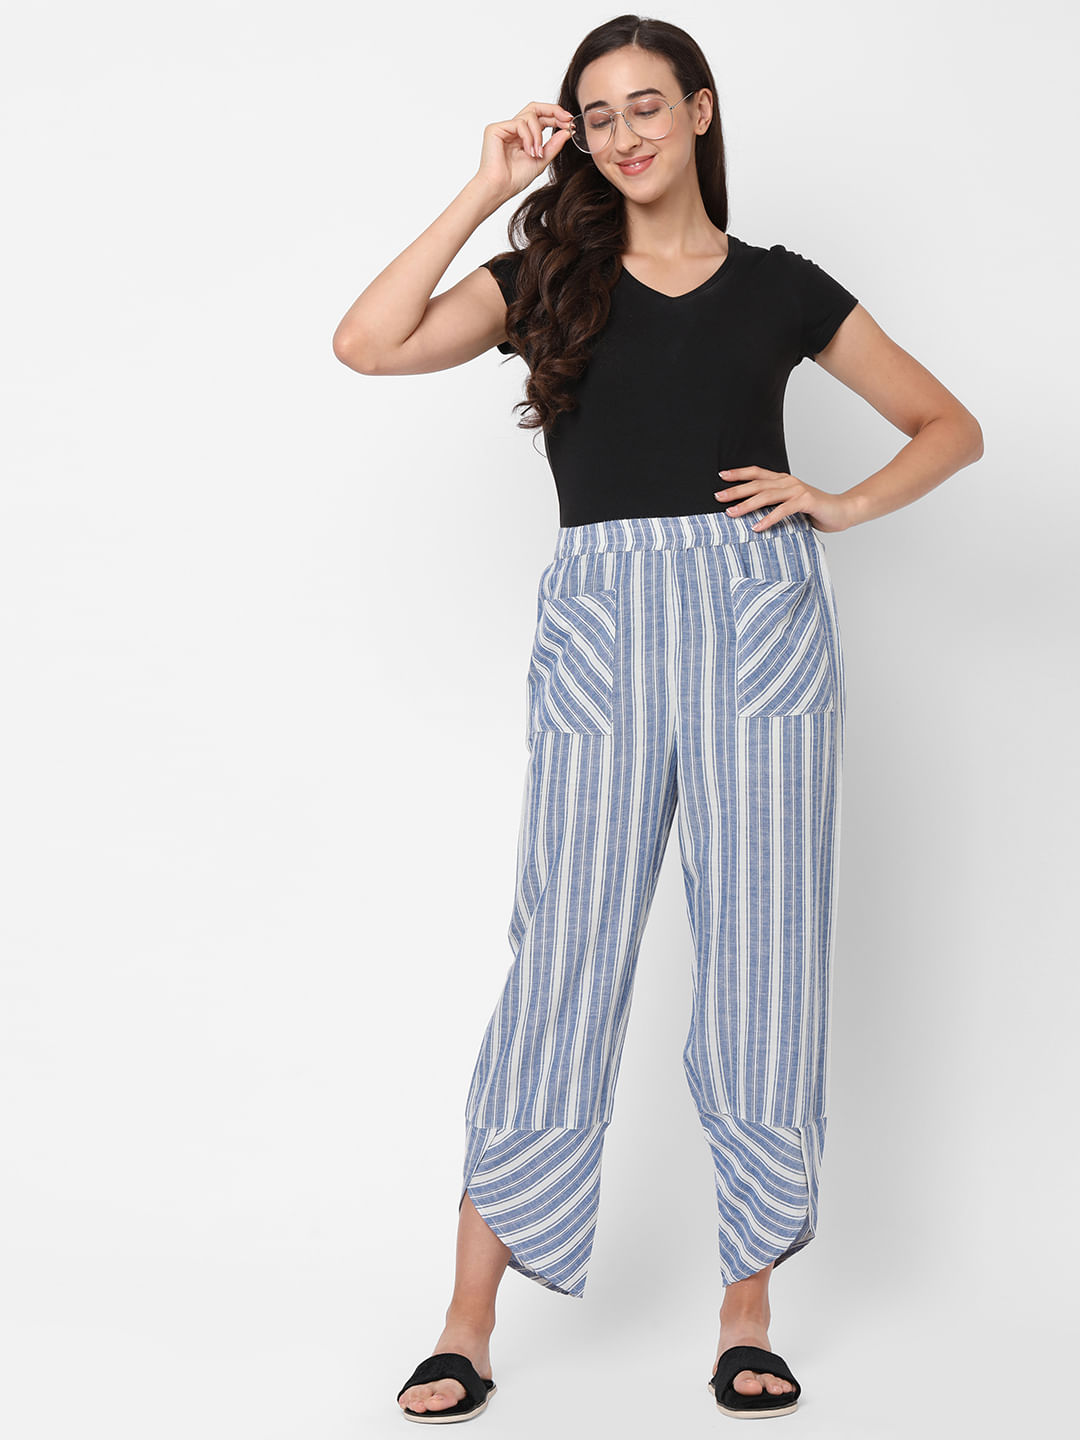 Buy Cutiekins Contrast Striped Palazzo Pants Multi Color for Girls  45Years Online in India Shop at FirstCrycom  8490628